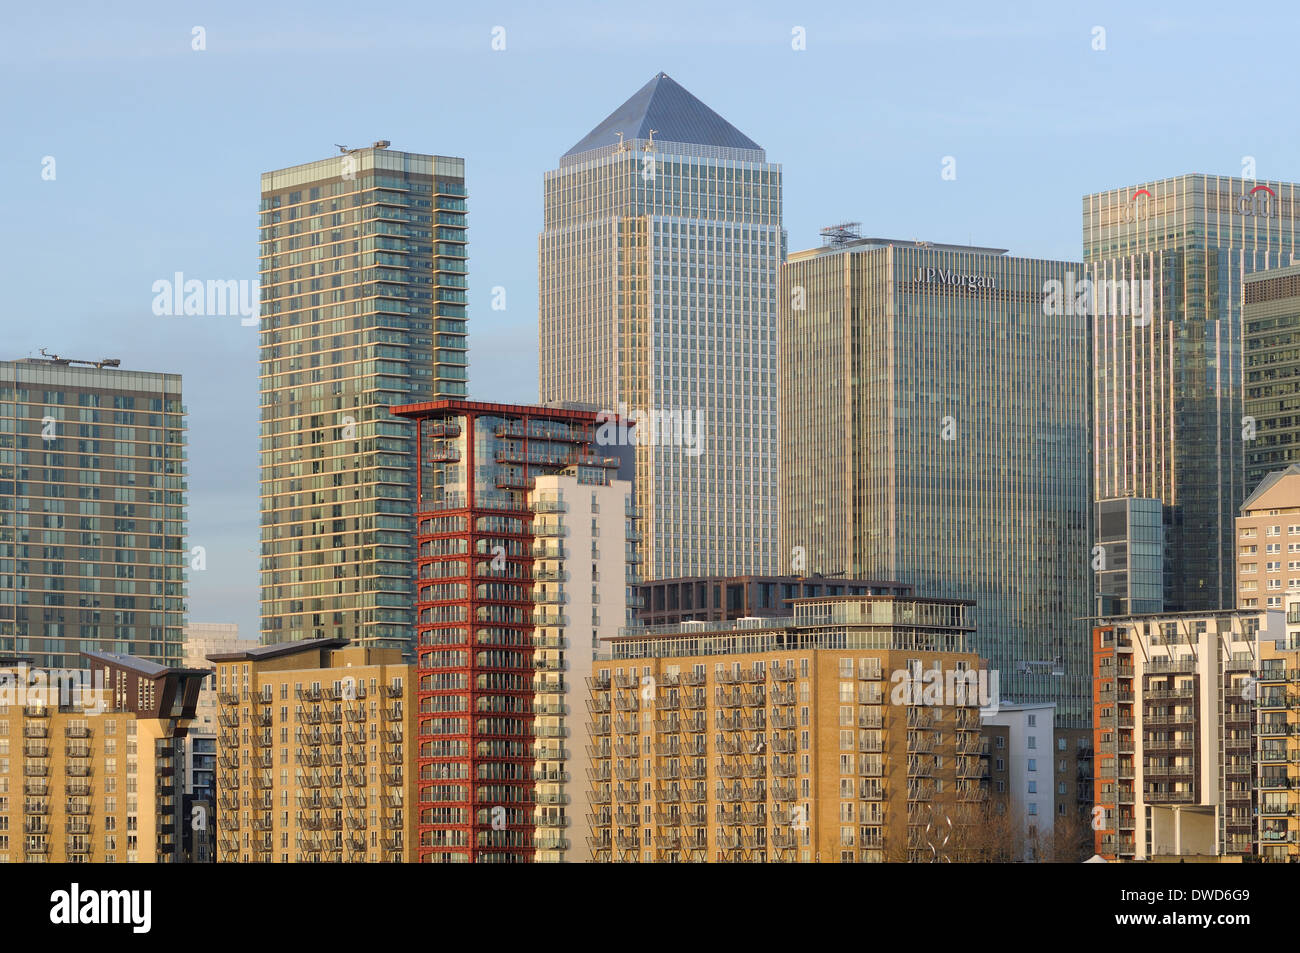 Skyscrapers and apartments at Canary Wharf business district, London UK Stock Photo